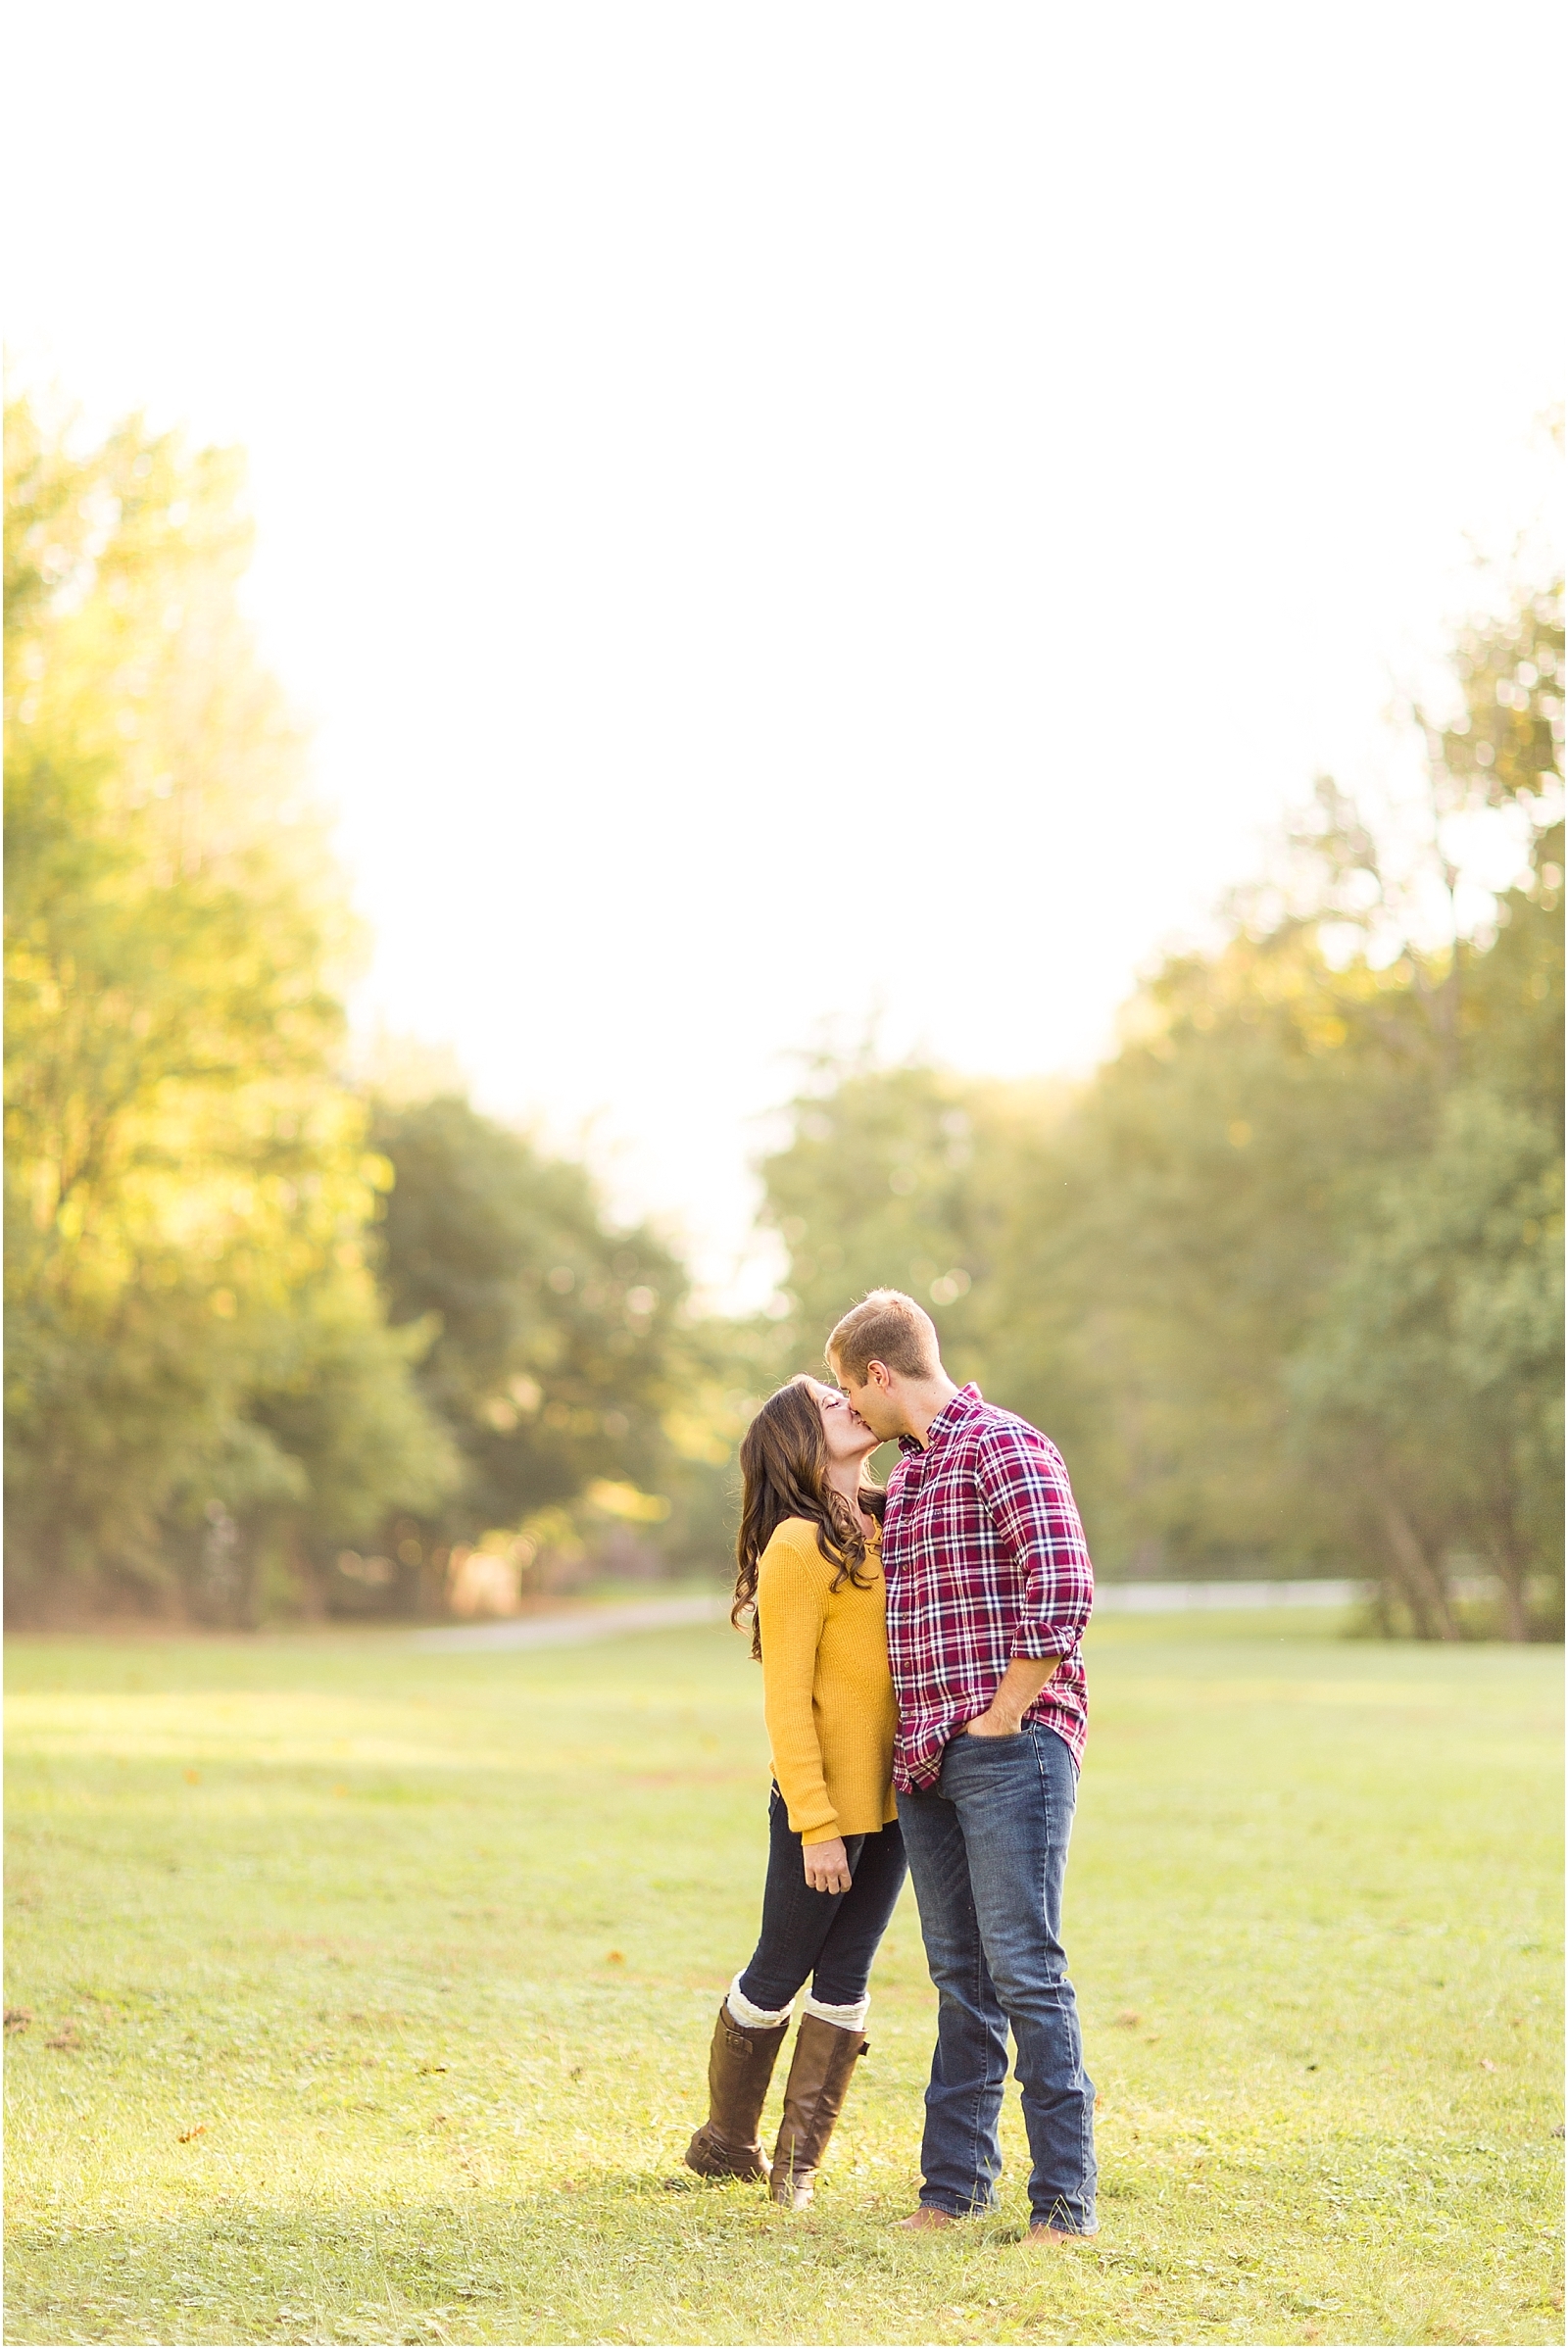 Stacey and Thomas | Engaged0002.jpg